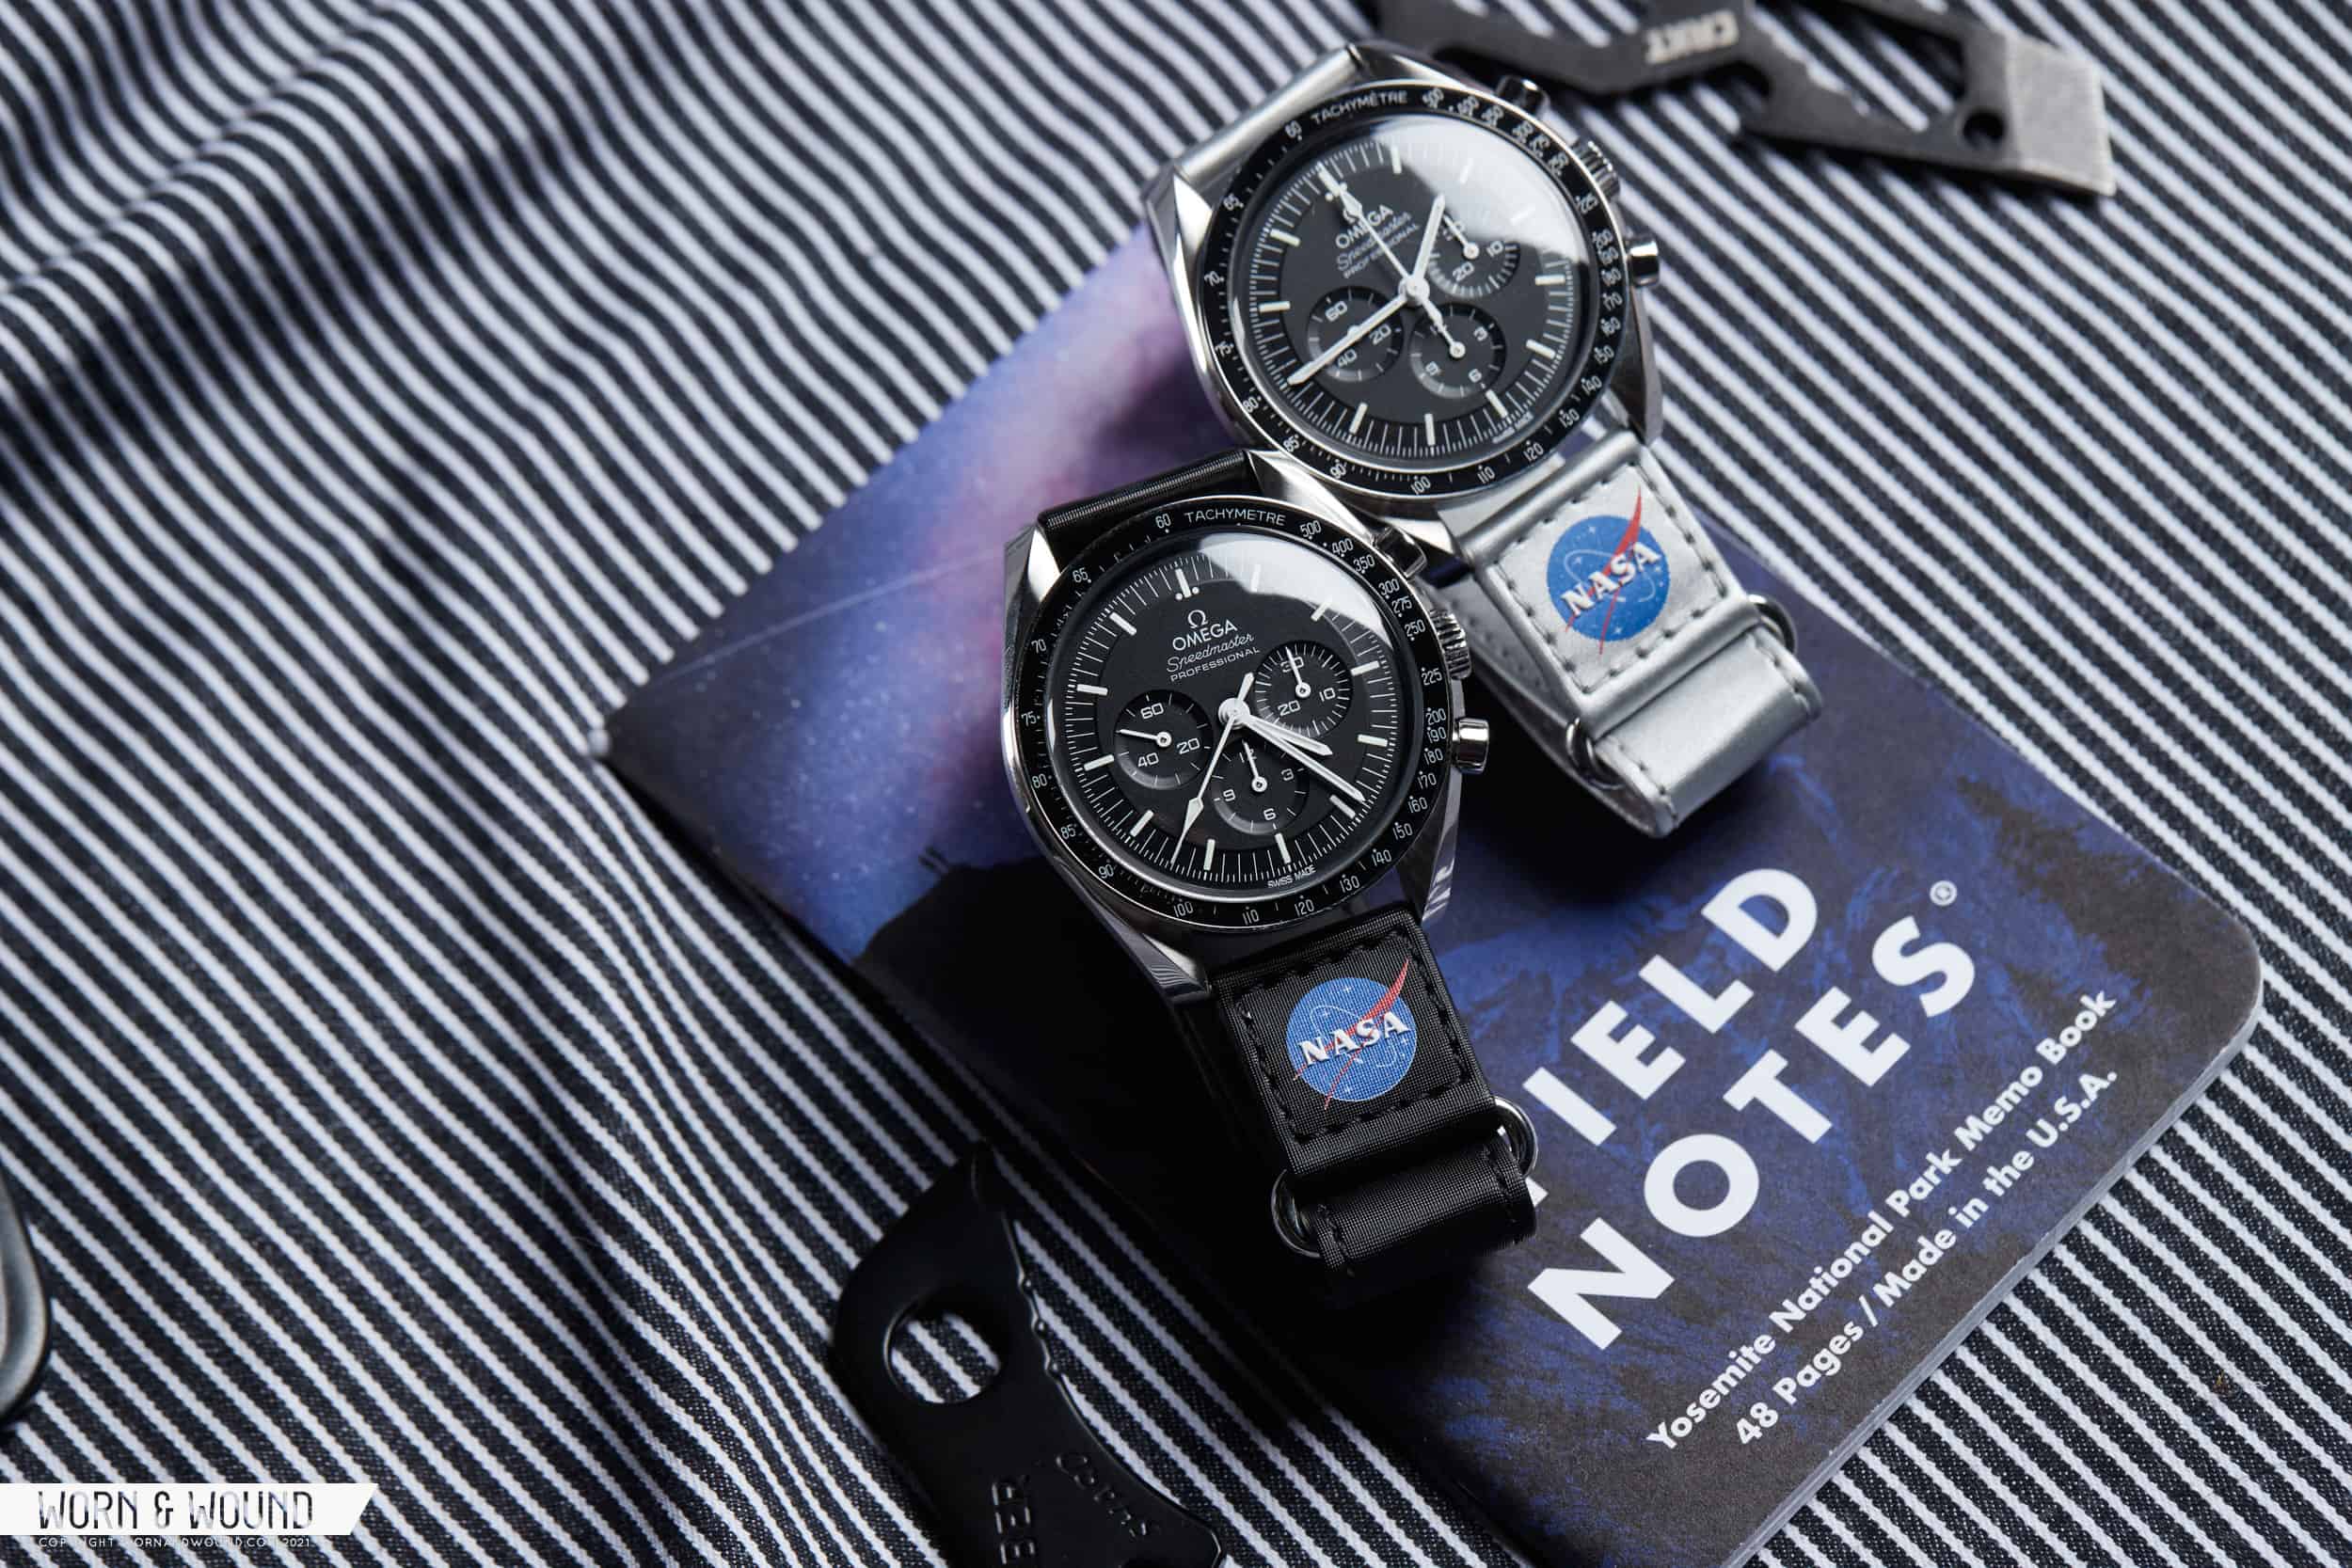 Hands-On With The Omega Speedmaster VELCRO Straps